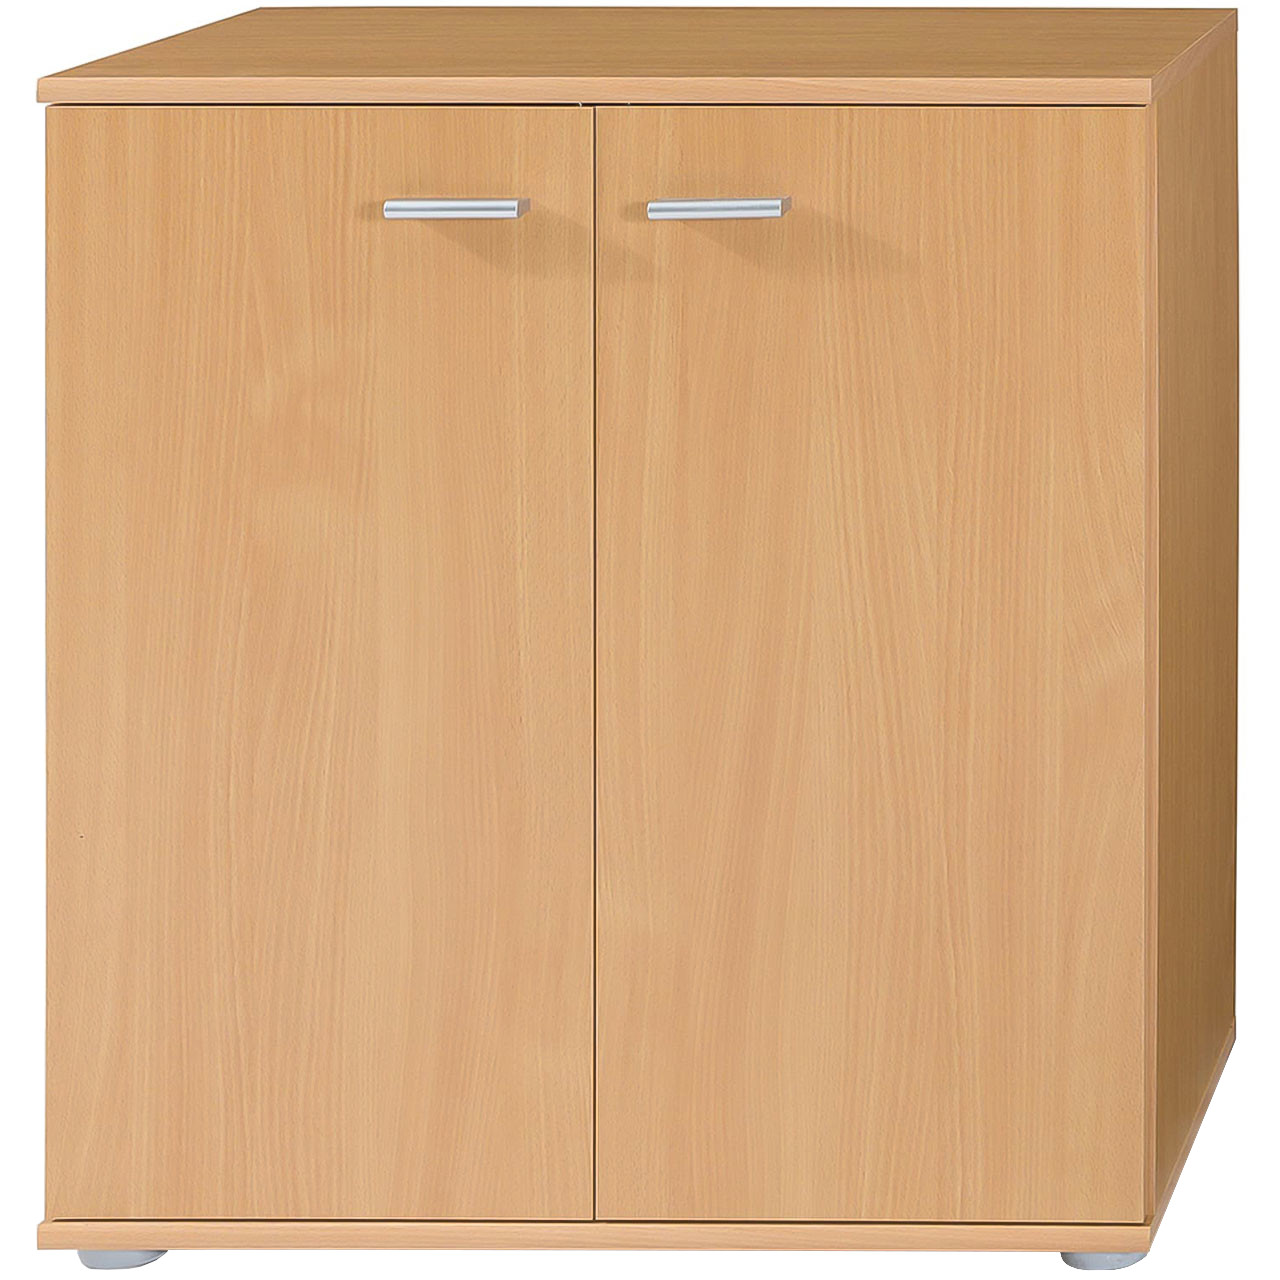 Storage cabinet MIKE 3 beech